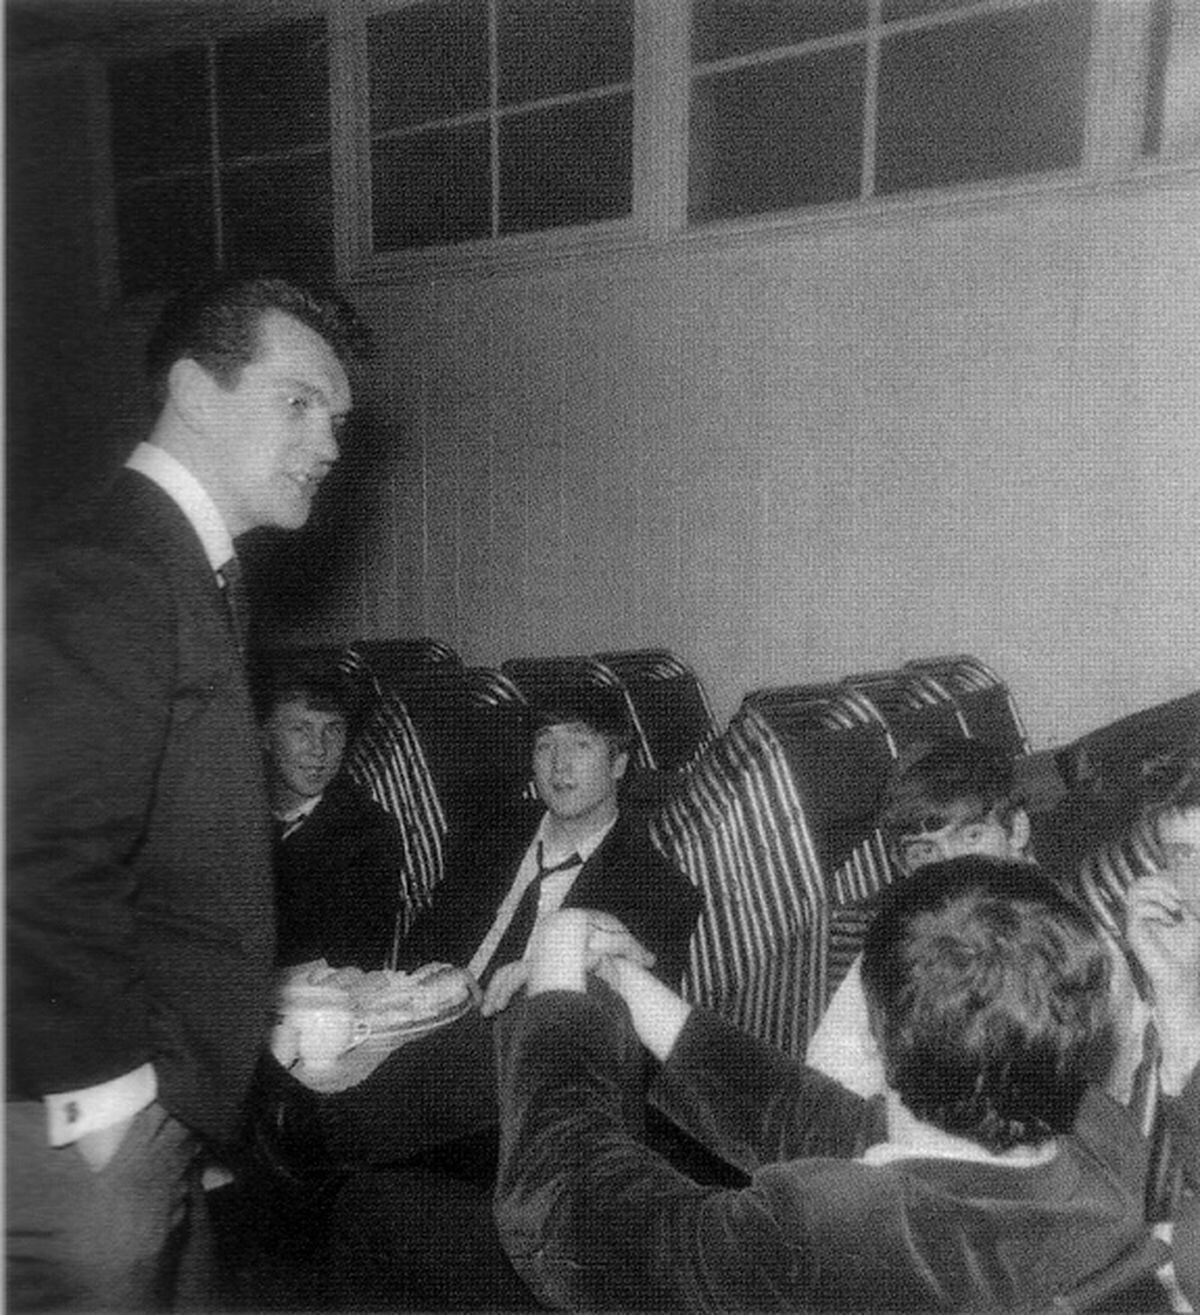 Jim Burgess, left, of Andre and the Electrons, chats with The Beatles.